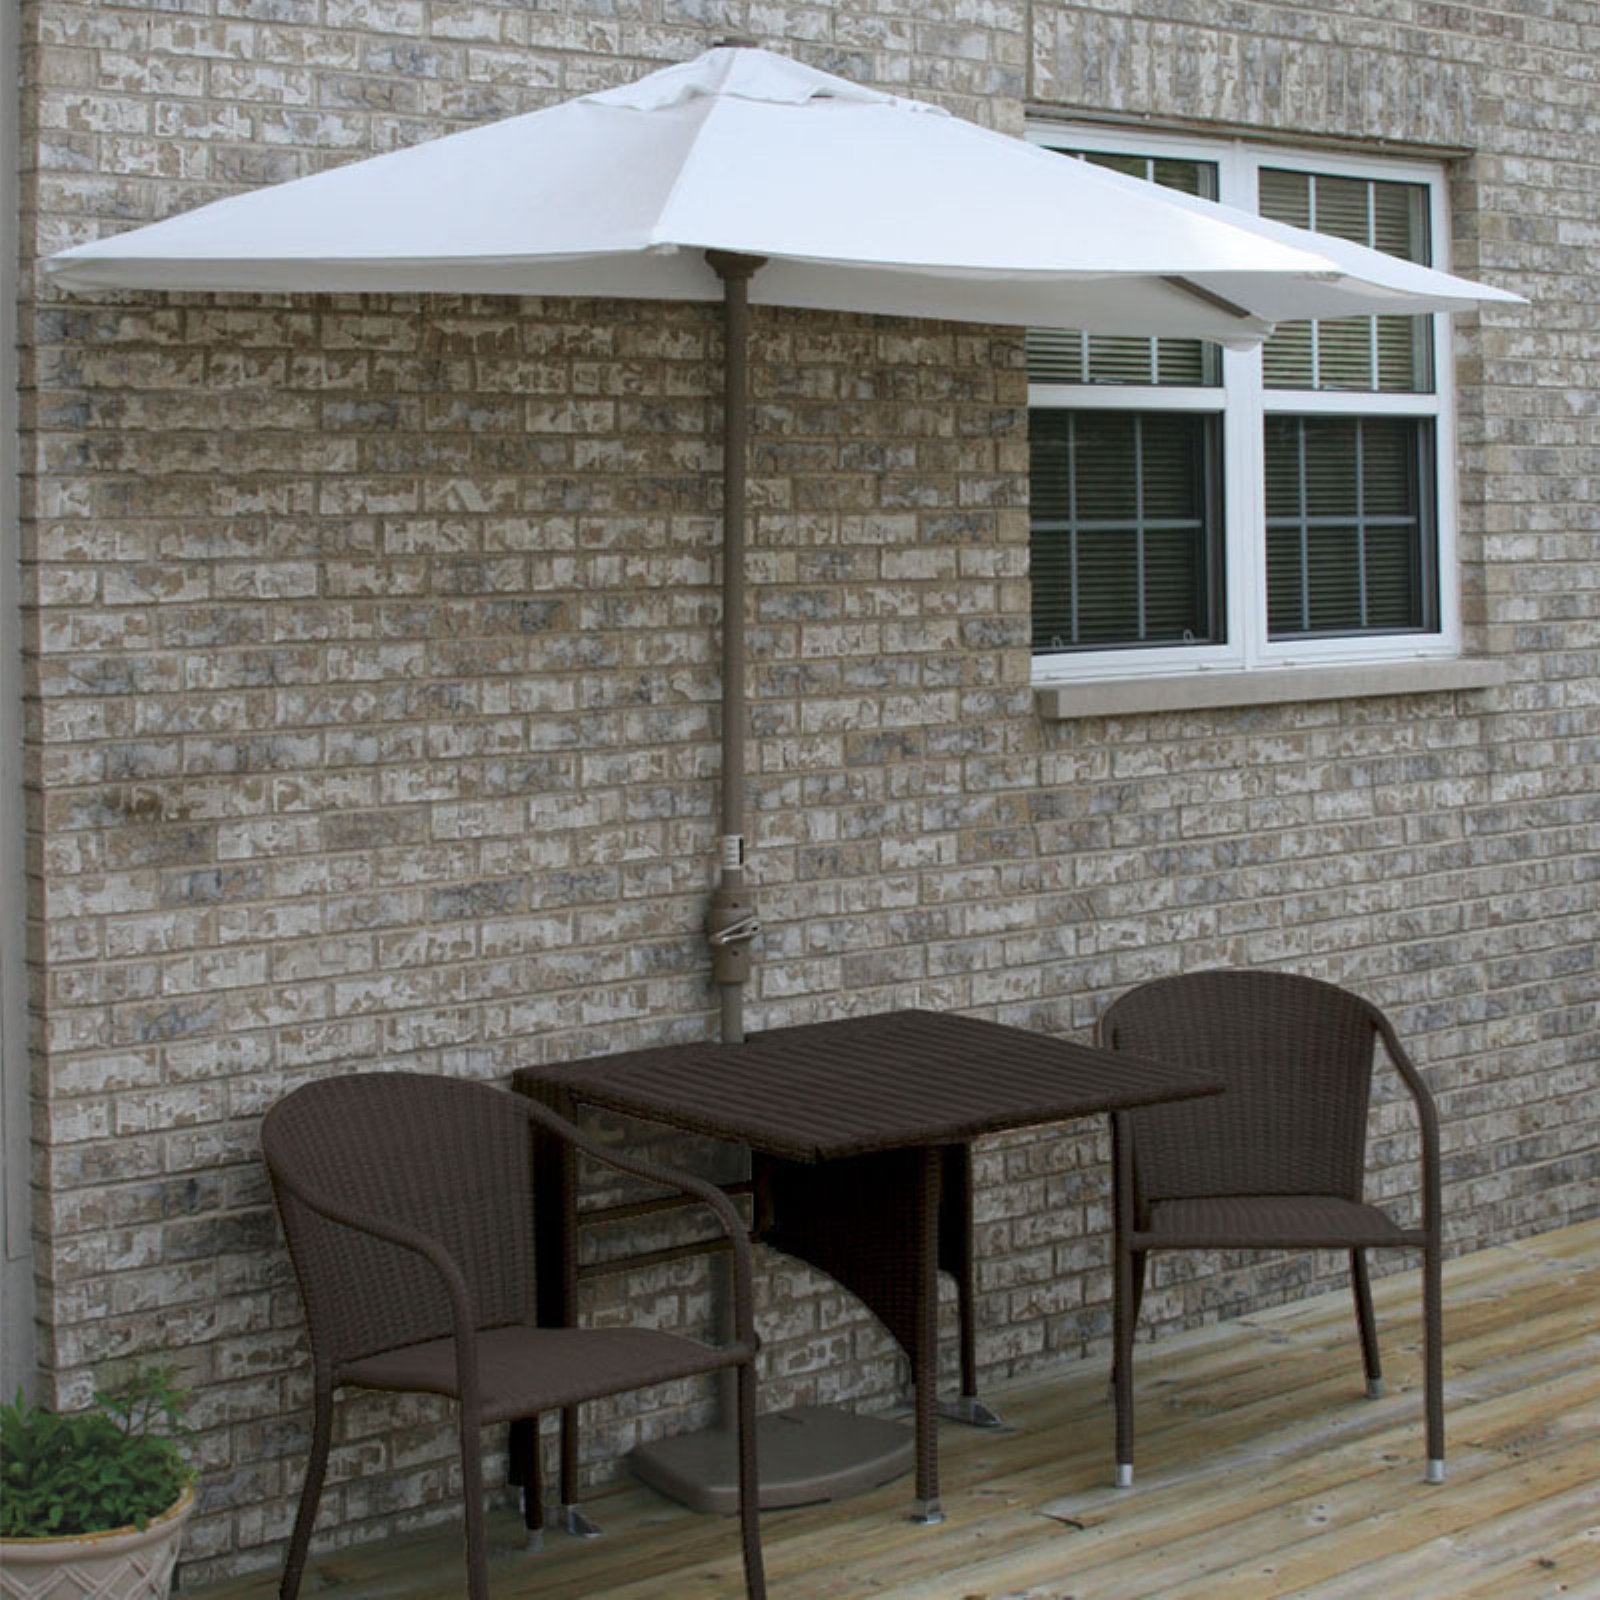 Blue Star Group Terrace Mates Daniella All-Weather Wicker Java Color Table Set w/ 7.5'-Wide OFF-THE-WALL BRELLA - Natural Olefin Canopy - image 2 of 9